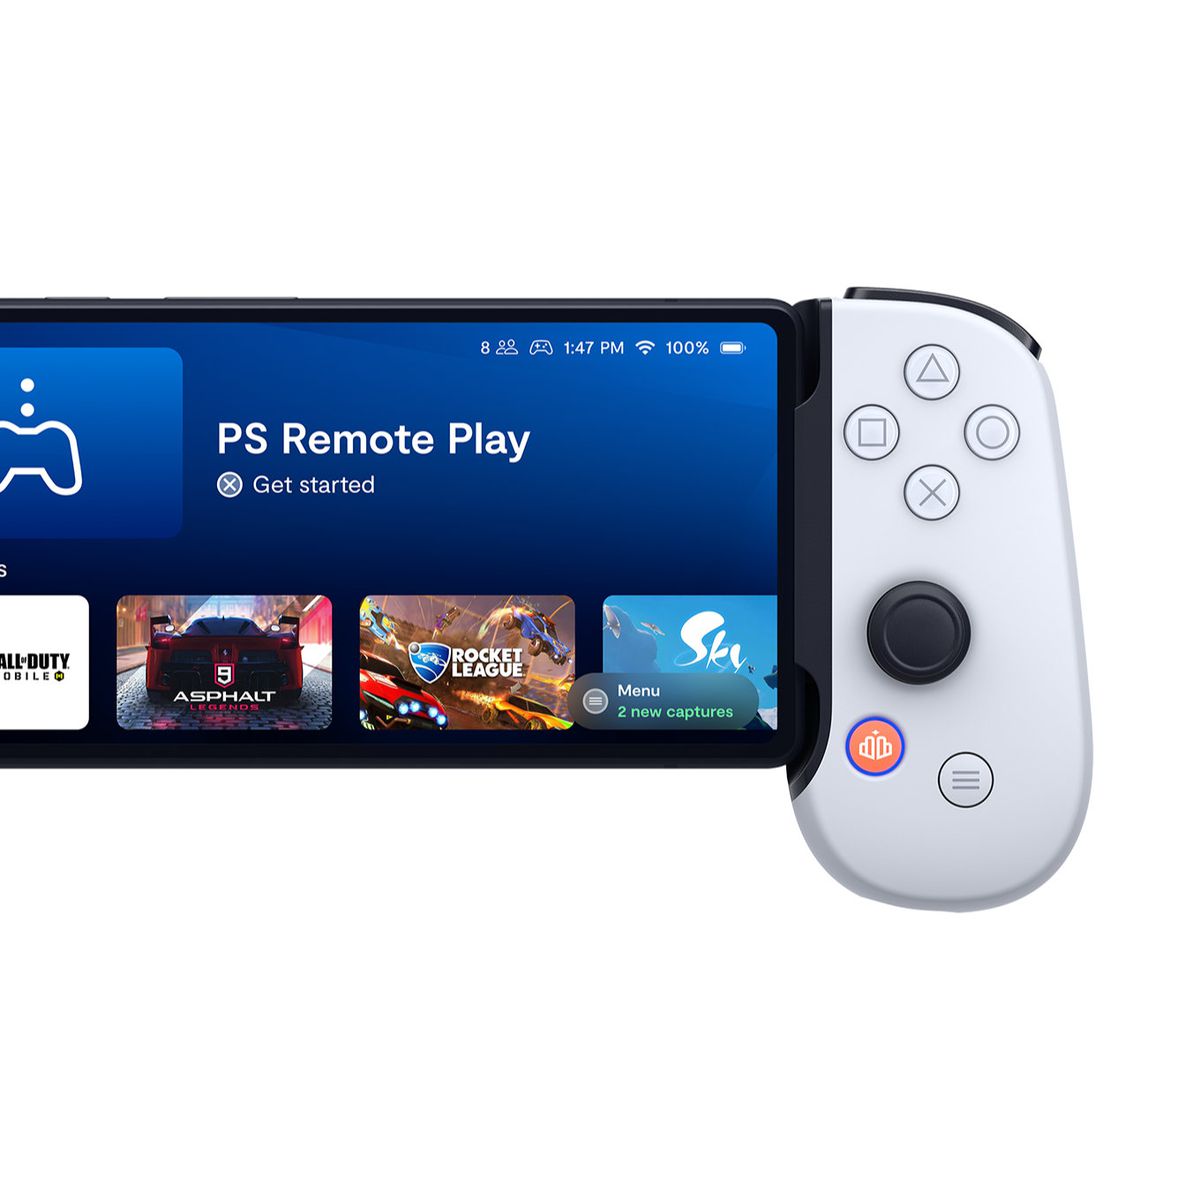 The Backbone PlayStation edition for Android. The controller is advertised spread open with a phone sitting in its middle. The phone’s screen shows a user interface that’s much like a console dashboard, filled with tiles of games and other interactive features, like videos and friends lists.